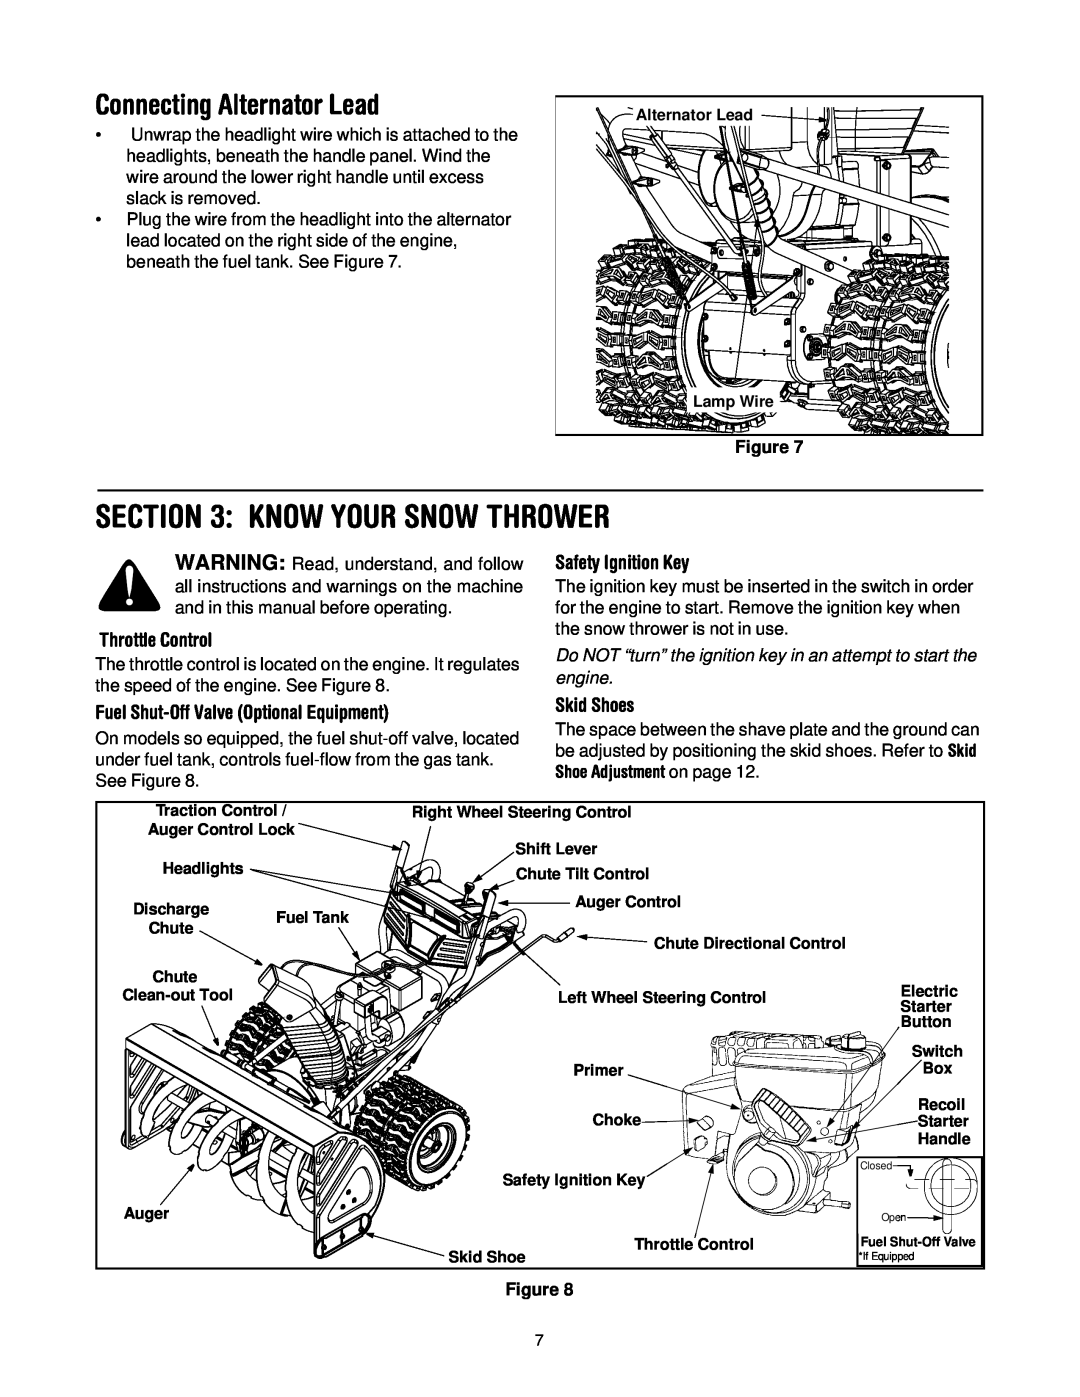 Troy-Bilt 13045 Know Your Snow Thrower, Connecting Alternator Lead, Throttle Control, Safety Ignition Key, Skid Shoes 